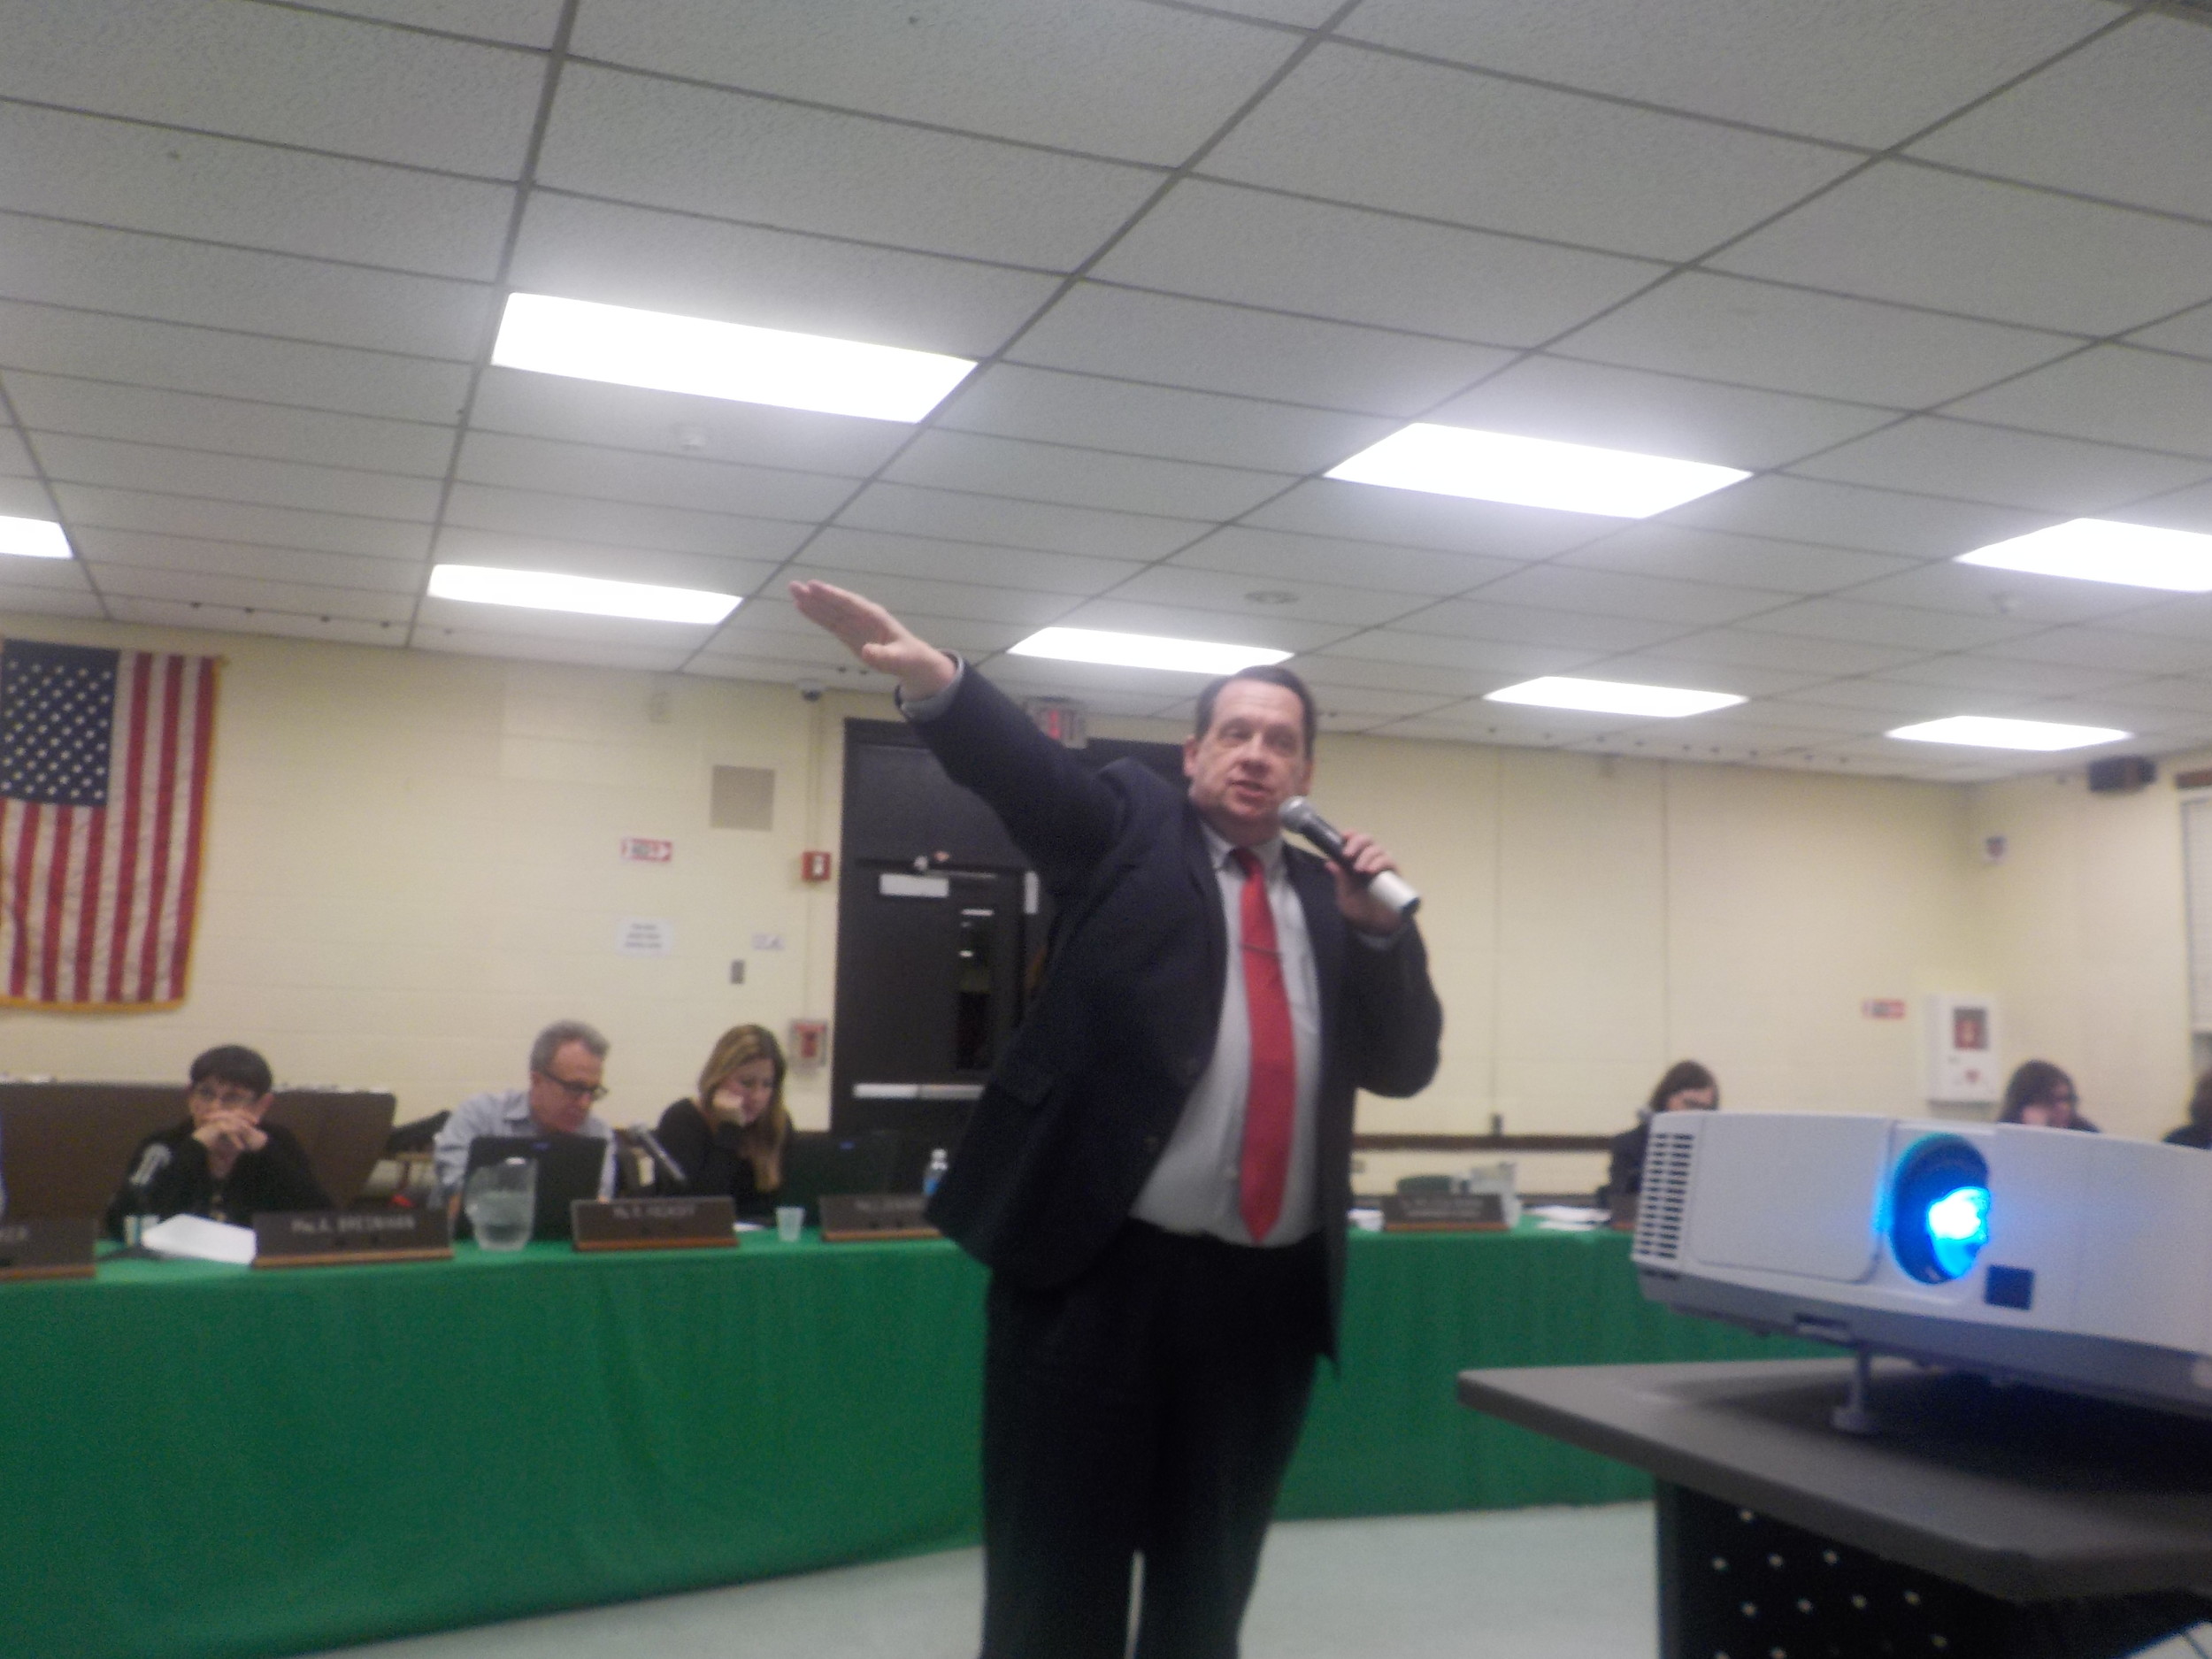 Paul Lynch, the assistant superintendent for finance, operations, and information systems for Lynbrook Schools, said the 2017-18 budget will eclipse $82 million.